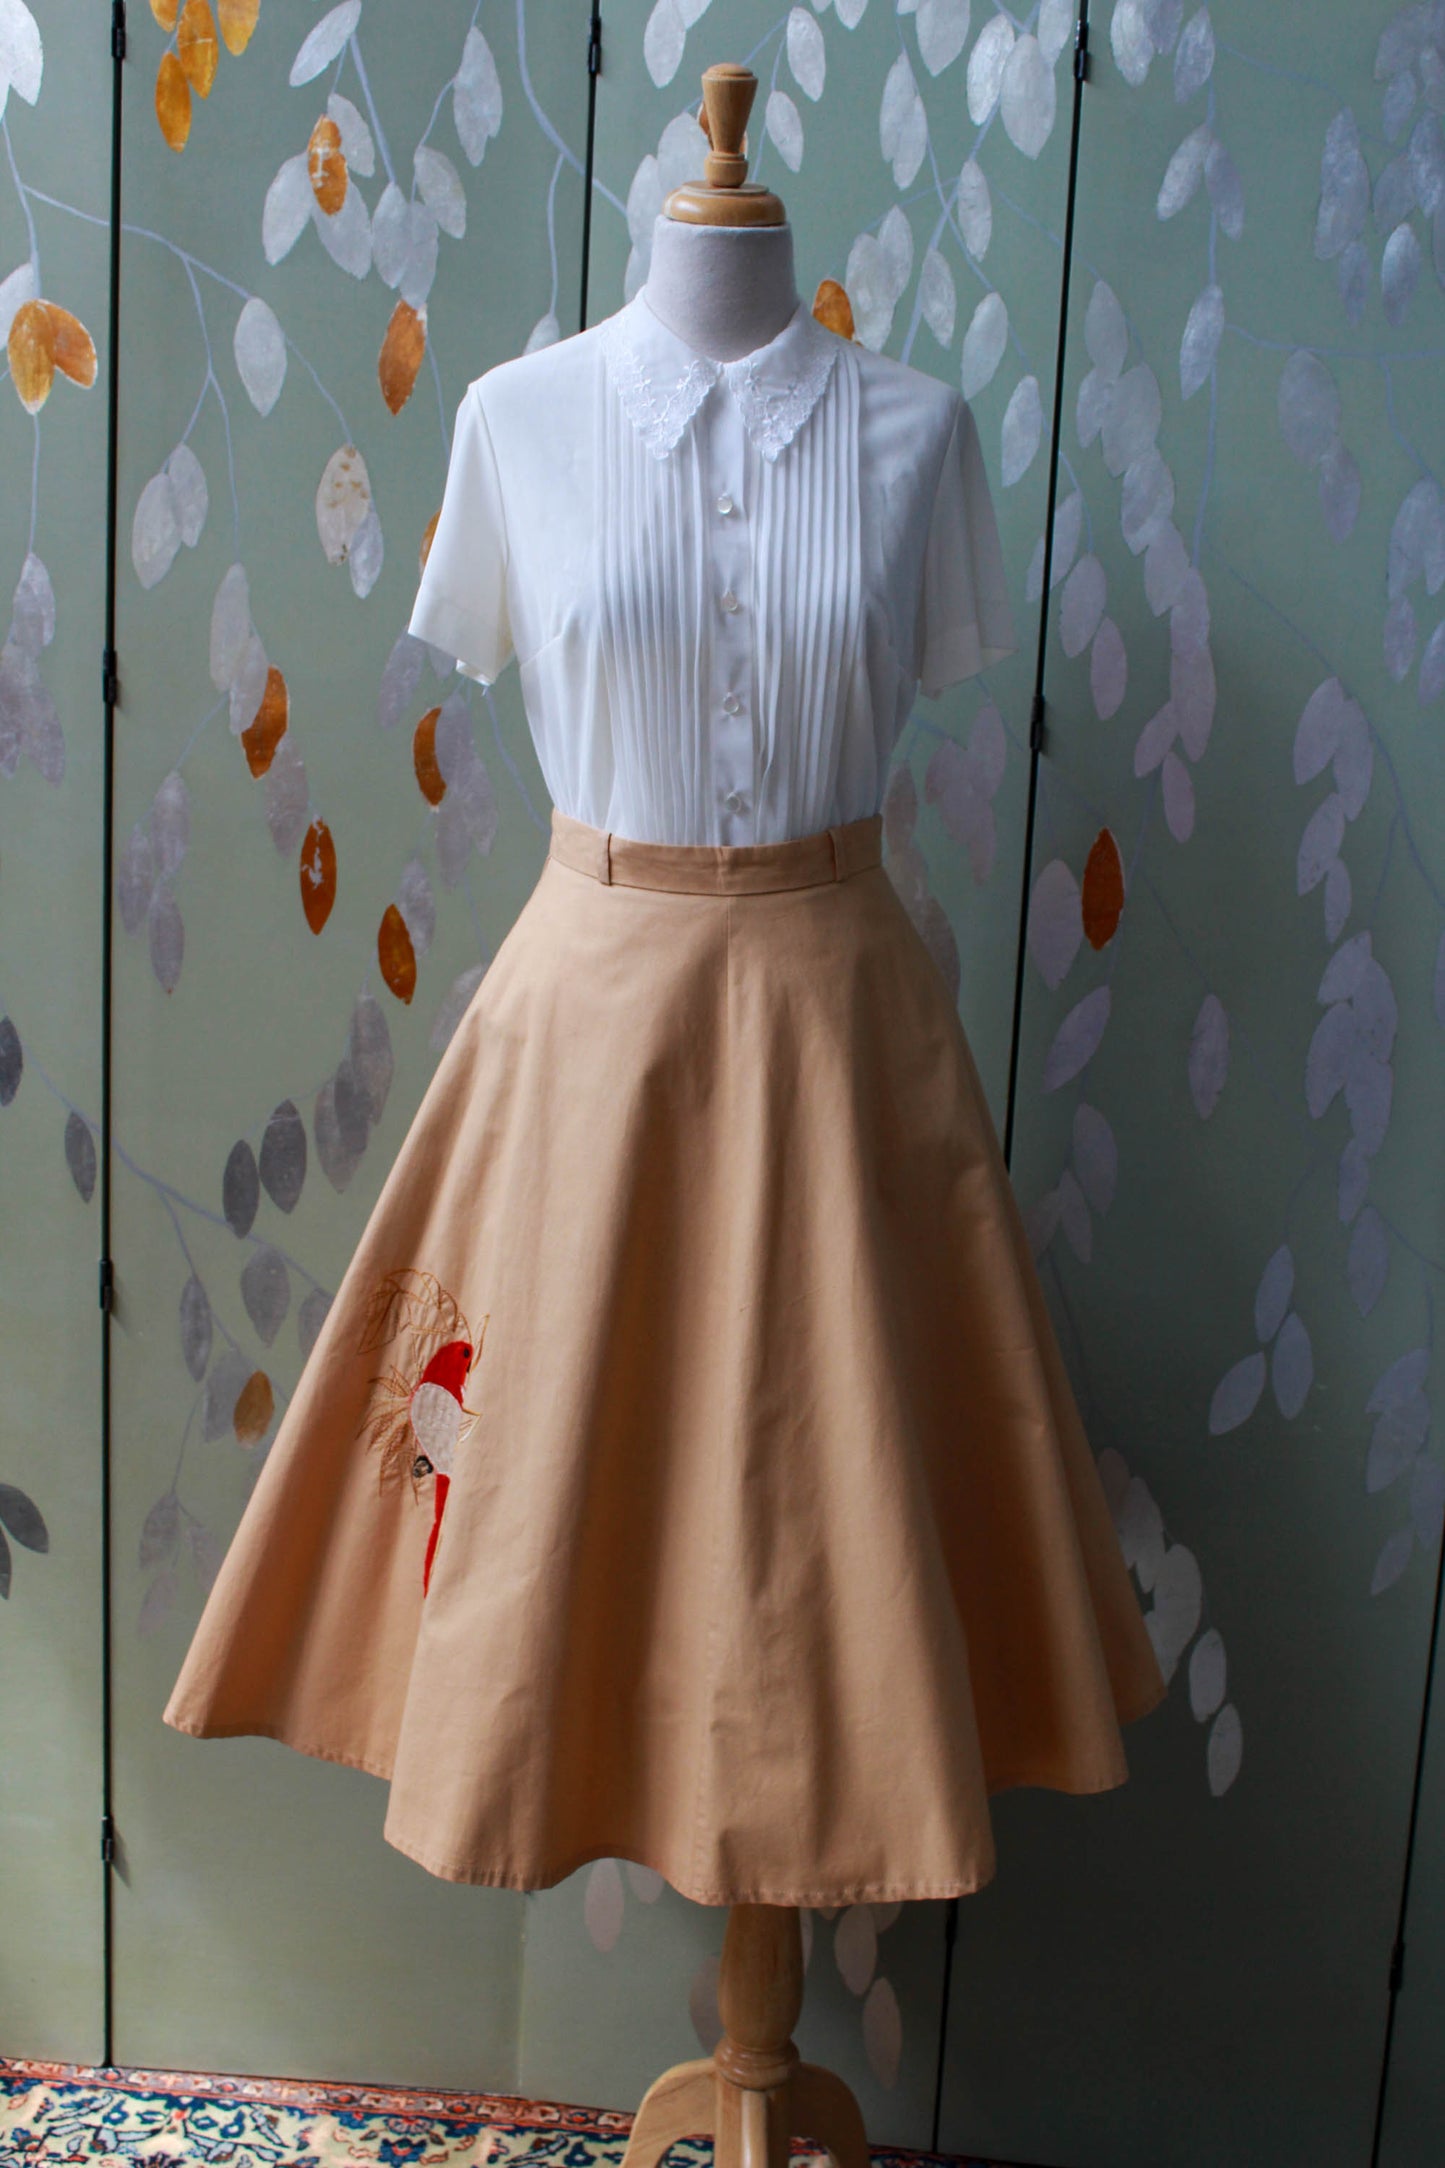 1970s 50s style circle skirt with parrot applique, high waisted, cotton resort skirt Made in France by Catherine I for Philippe Salvet St Tropez Nice